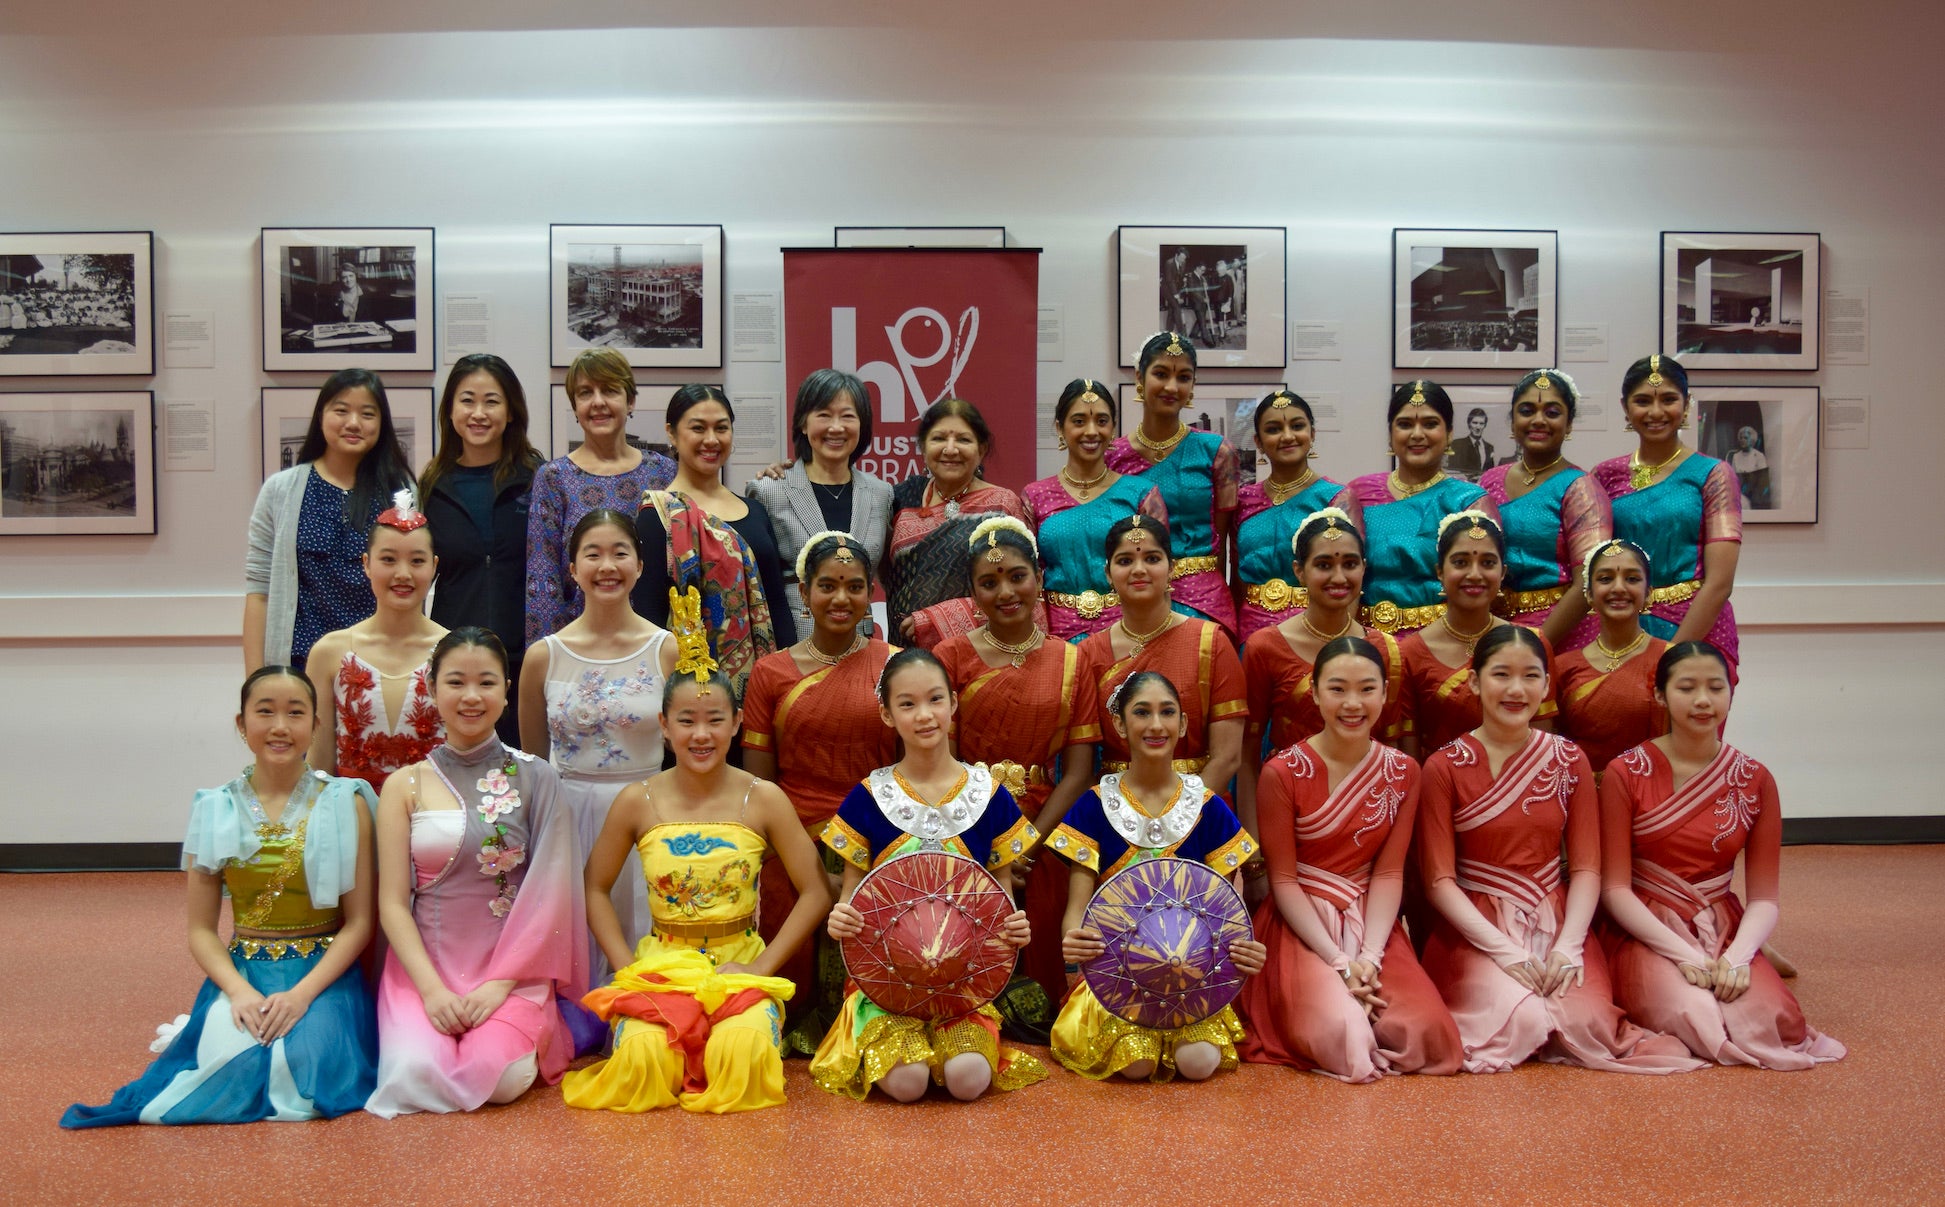 Dancers and organizers pose for a group photo